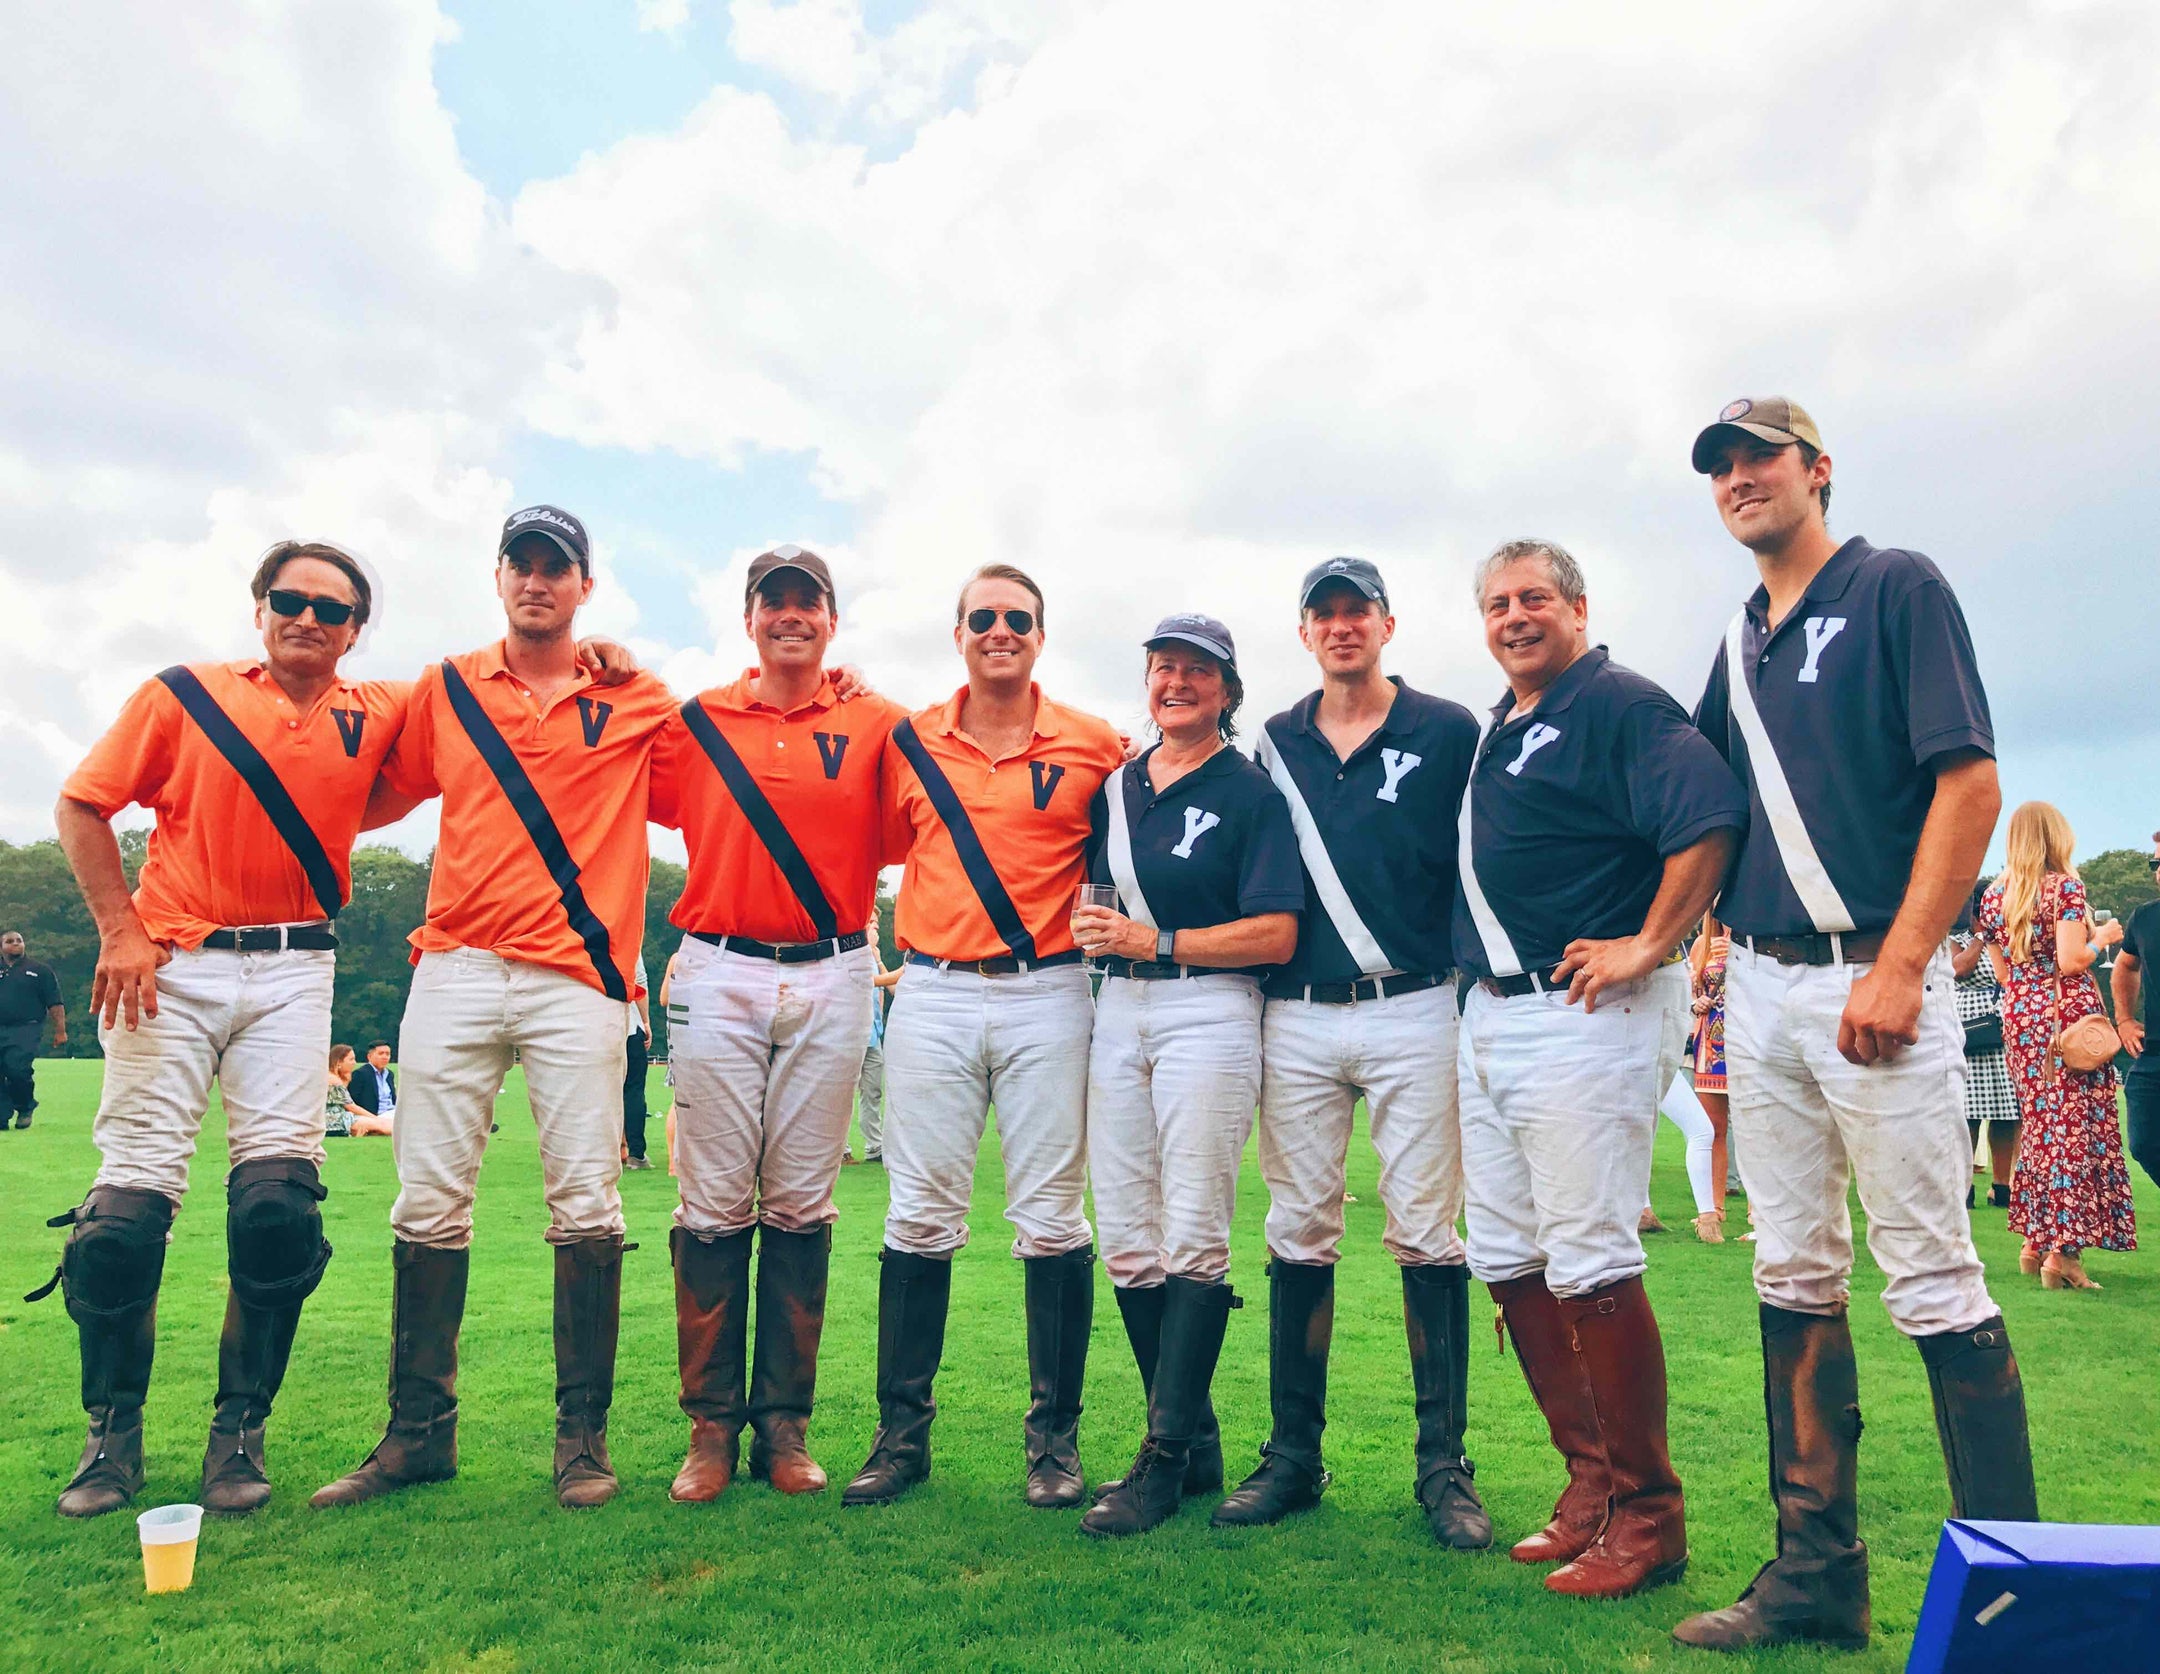 Rowing Blazers at The Harriman Cup  (Rowing Blazers is proud to be the official outfitter of America's greatest collegiate polo rivalry, The Harriman Cup)